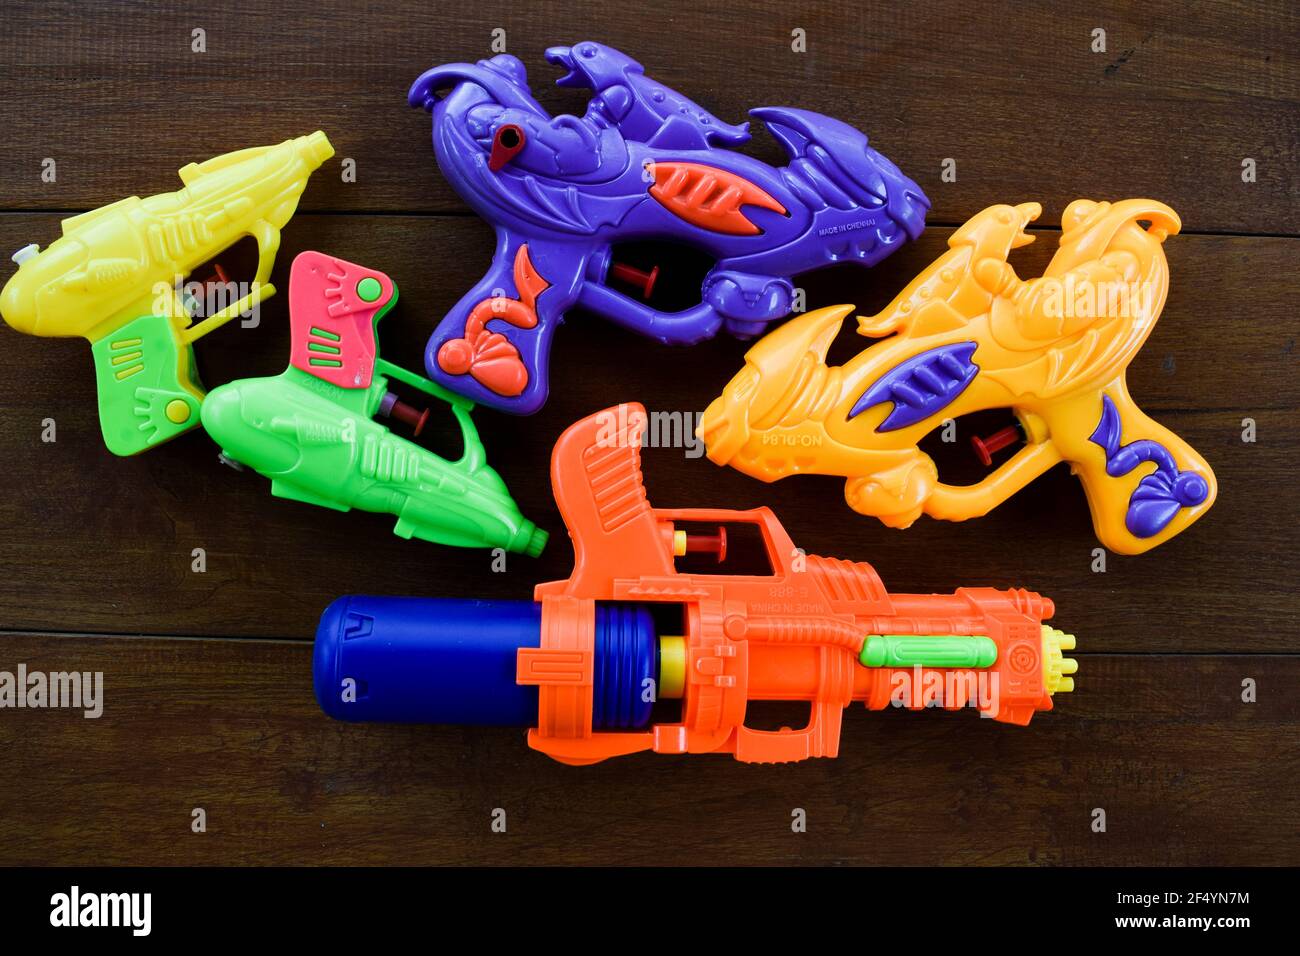 Pichkari, a water gun or toy gun used as props to shoot water and play on the occassion of Indian Holi festival celebrationg. Kids toy guns pinchkari Stock Photo